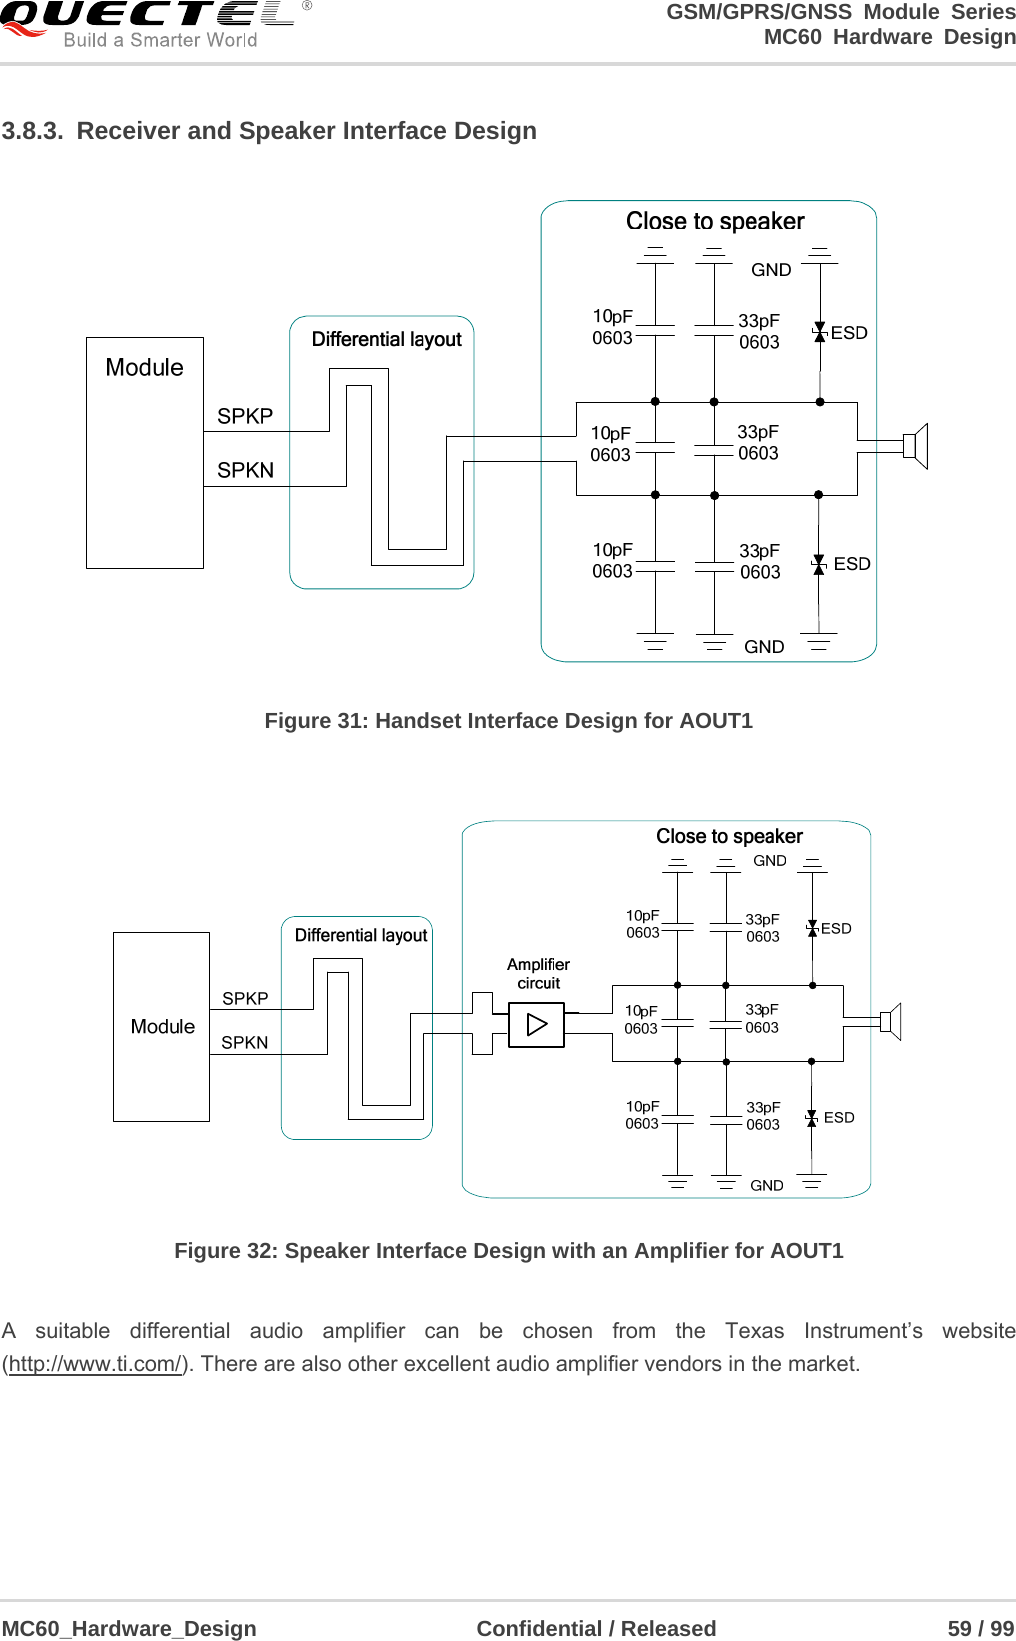                                                                     GSM/GPRS/GNSS Module Series                                                                 MC60 Hardware Design  MC60_Hardware_Design                    Confidential / Released                     59 / 99     3.8.3.  Receiver and Speaker Interface Design  Figure 31: Handset Interface Design for AOUT1   Figure 32: Speaker Interface Design with an Amplifier for AOUT1  A suitable differential audio amplifier can be chosen from the Texas Instrument’s website (http://www.ti.com/). There are also other excellent audio amplifier vendors in the market.    